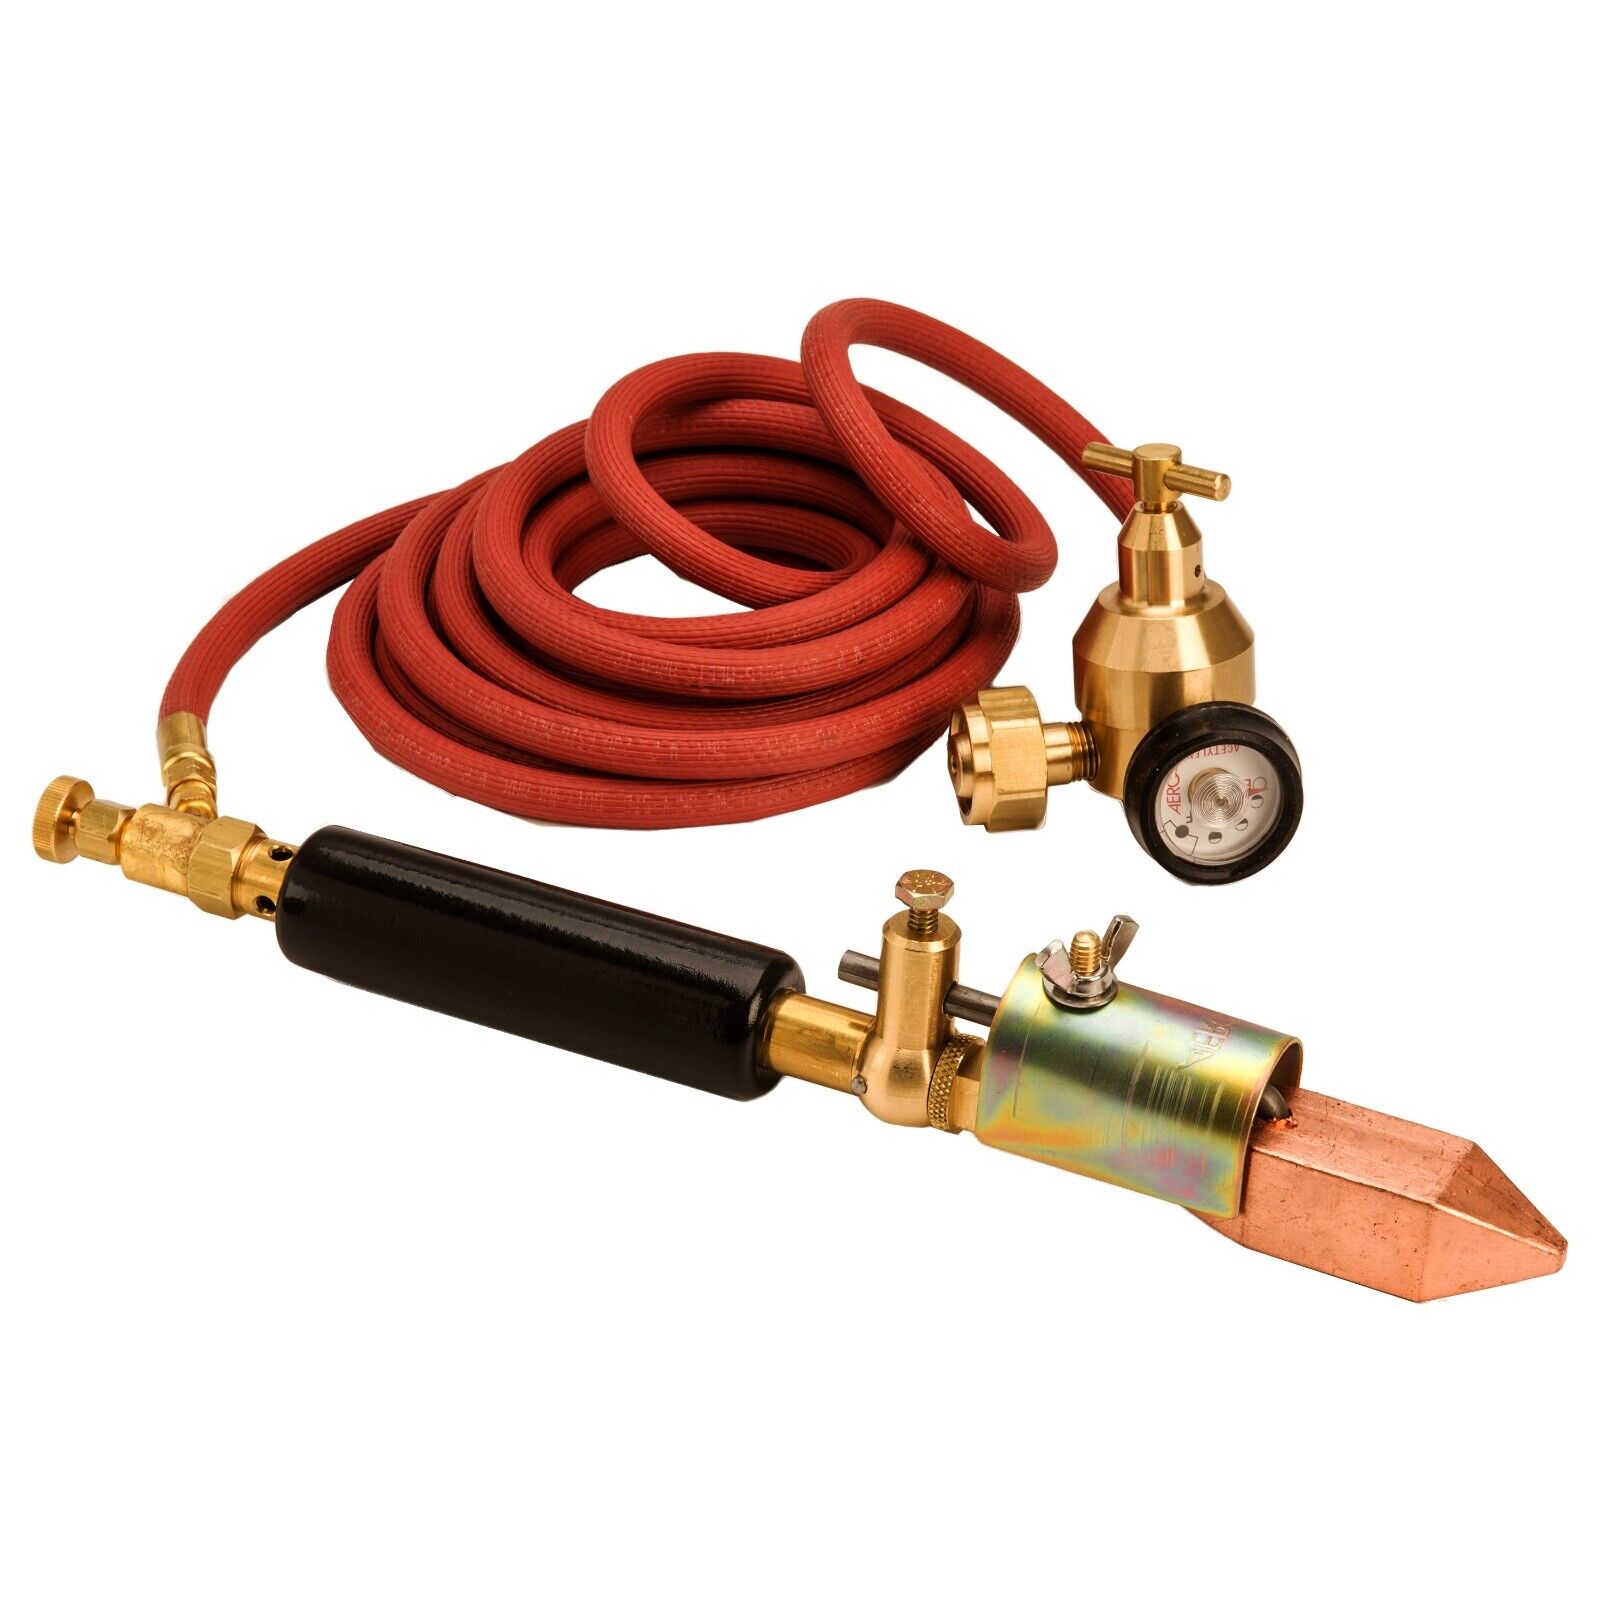 Copper roofing  /Aero  Duplex  Soldering Torch with #12 iron Kit